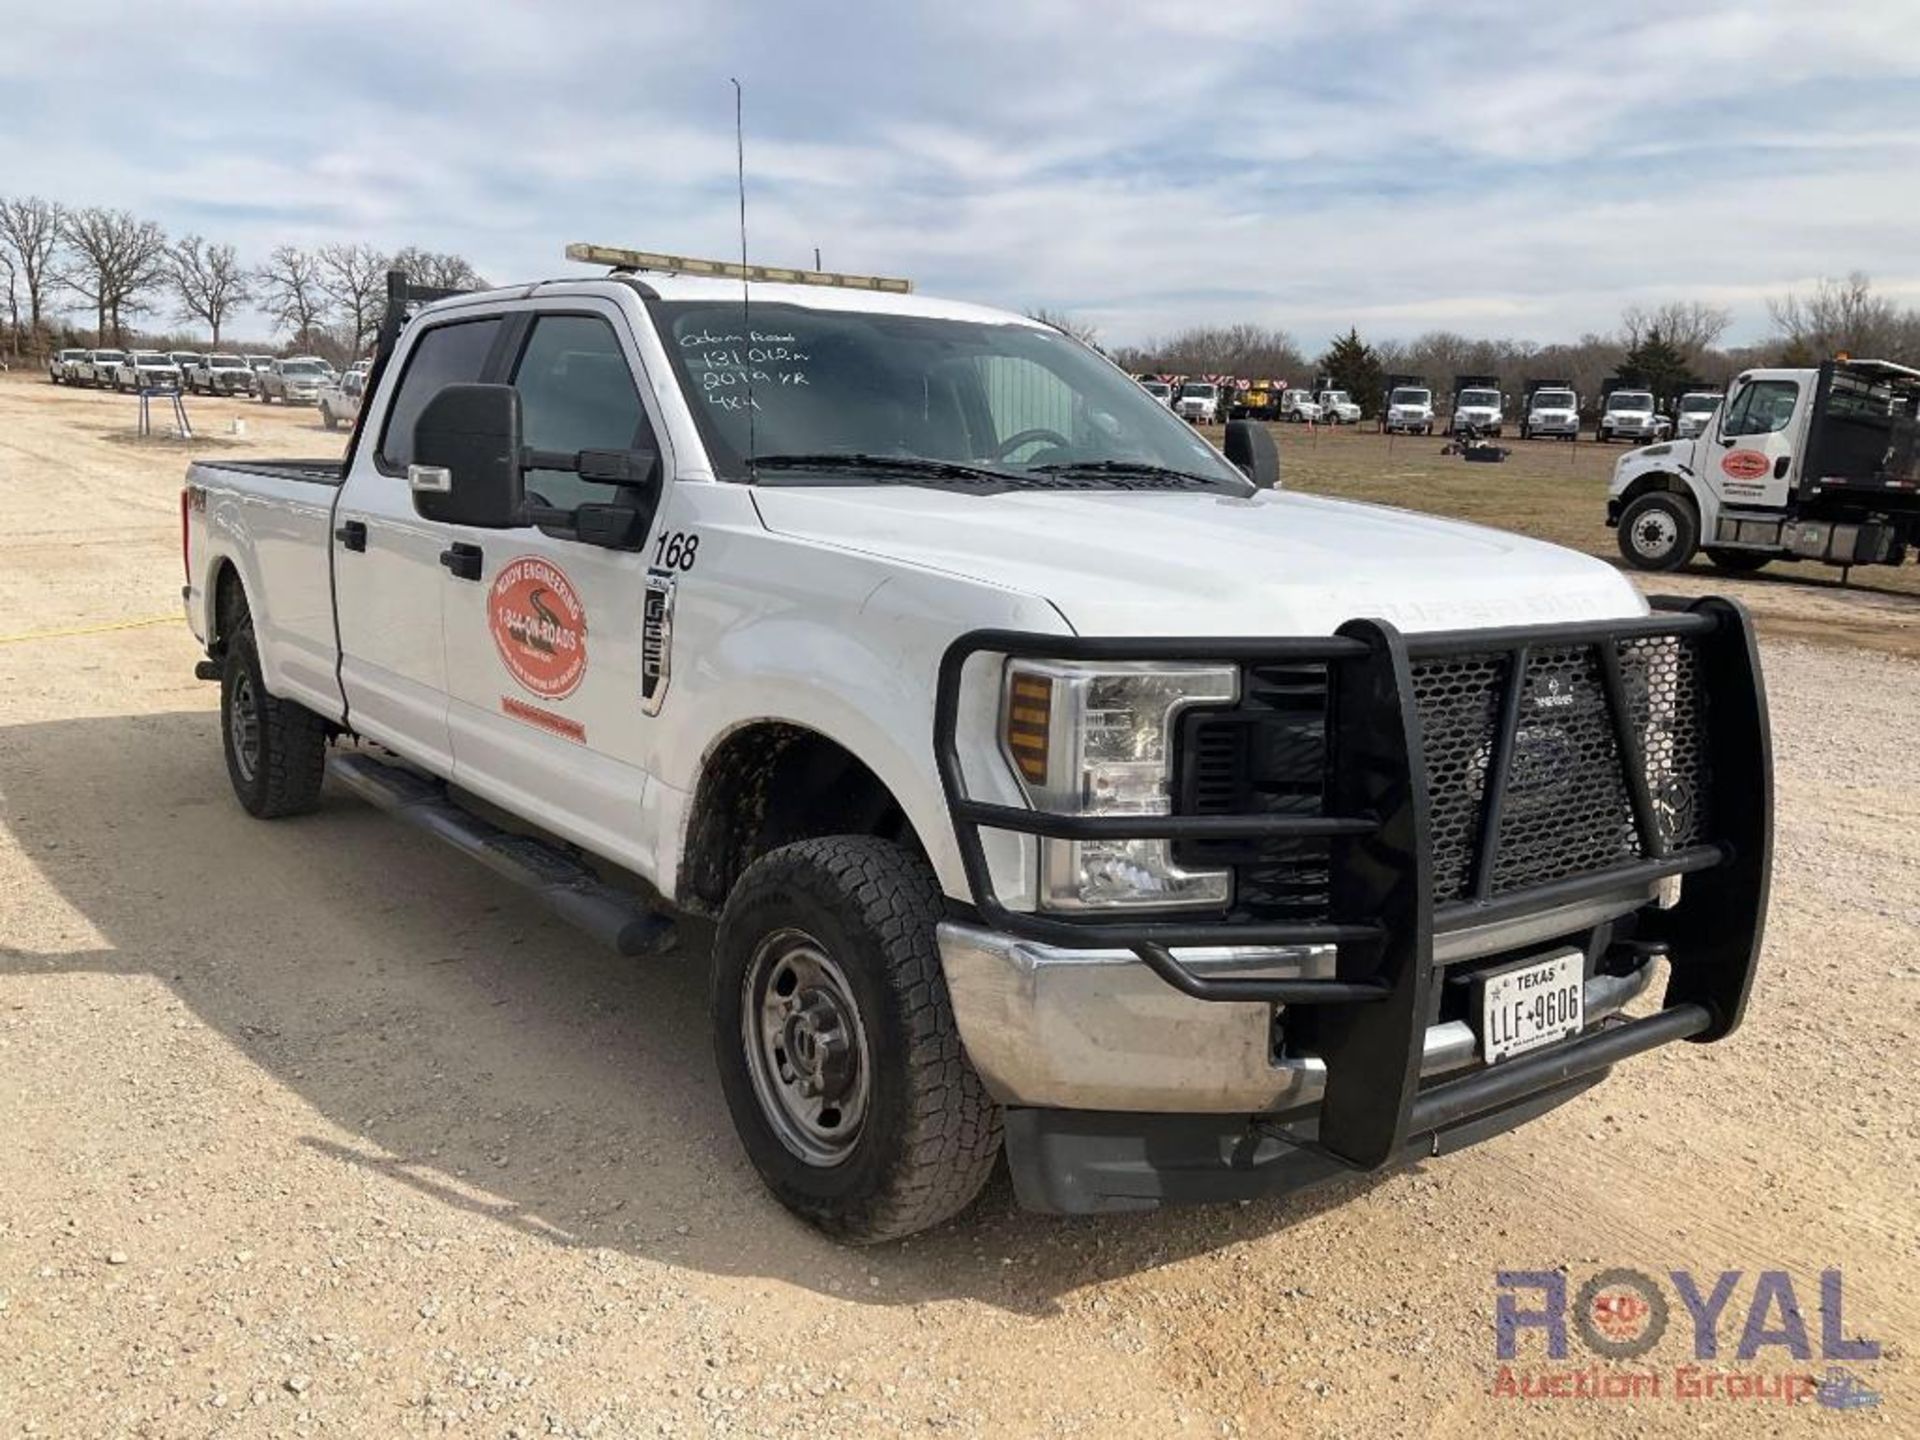 2019 Ford F250 4x4 Crew Cab Pickup Truck - Image 2 of 27